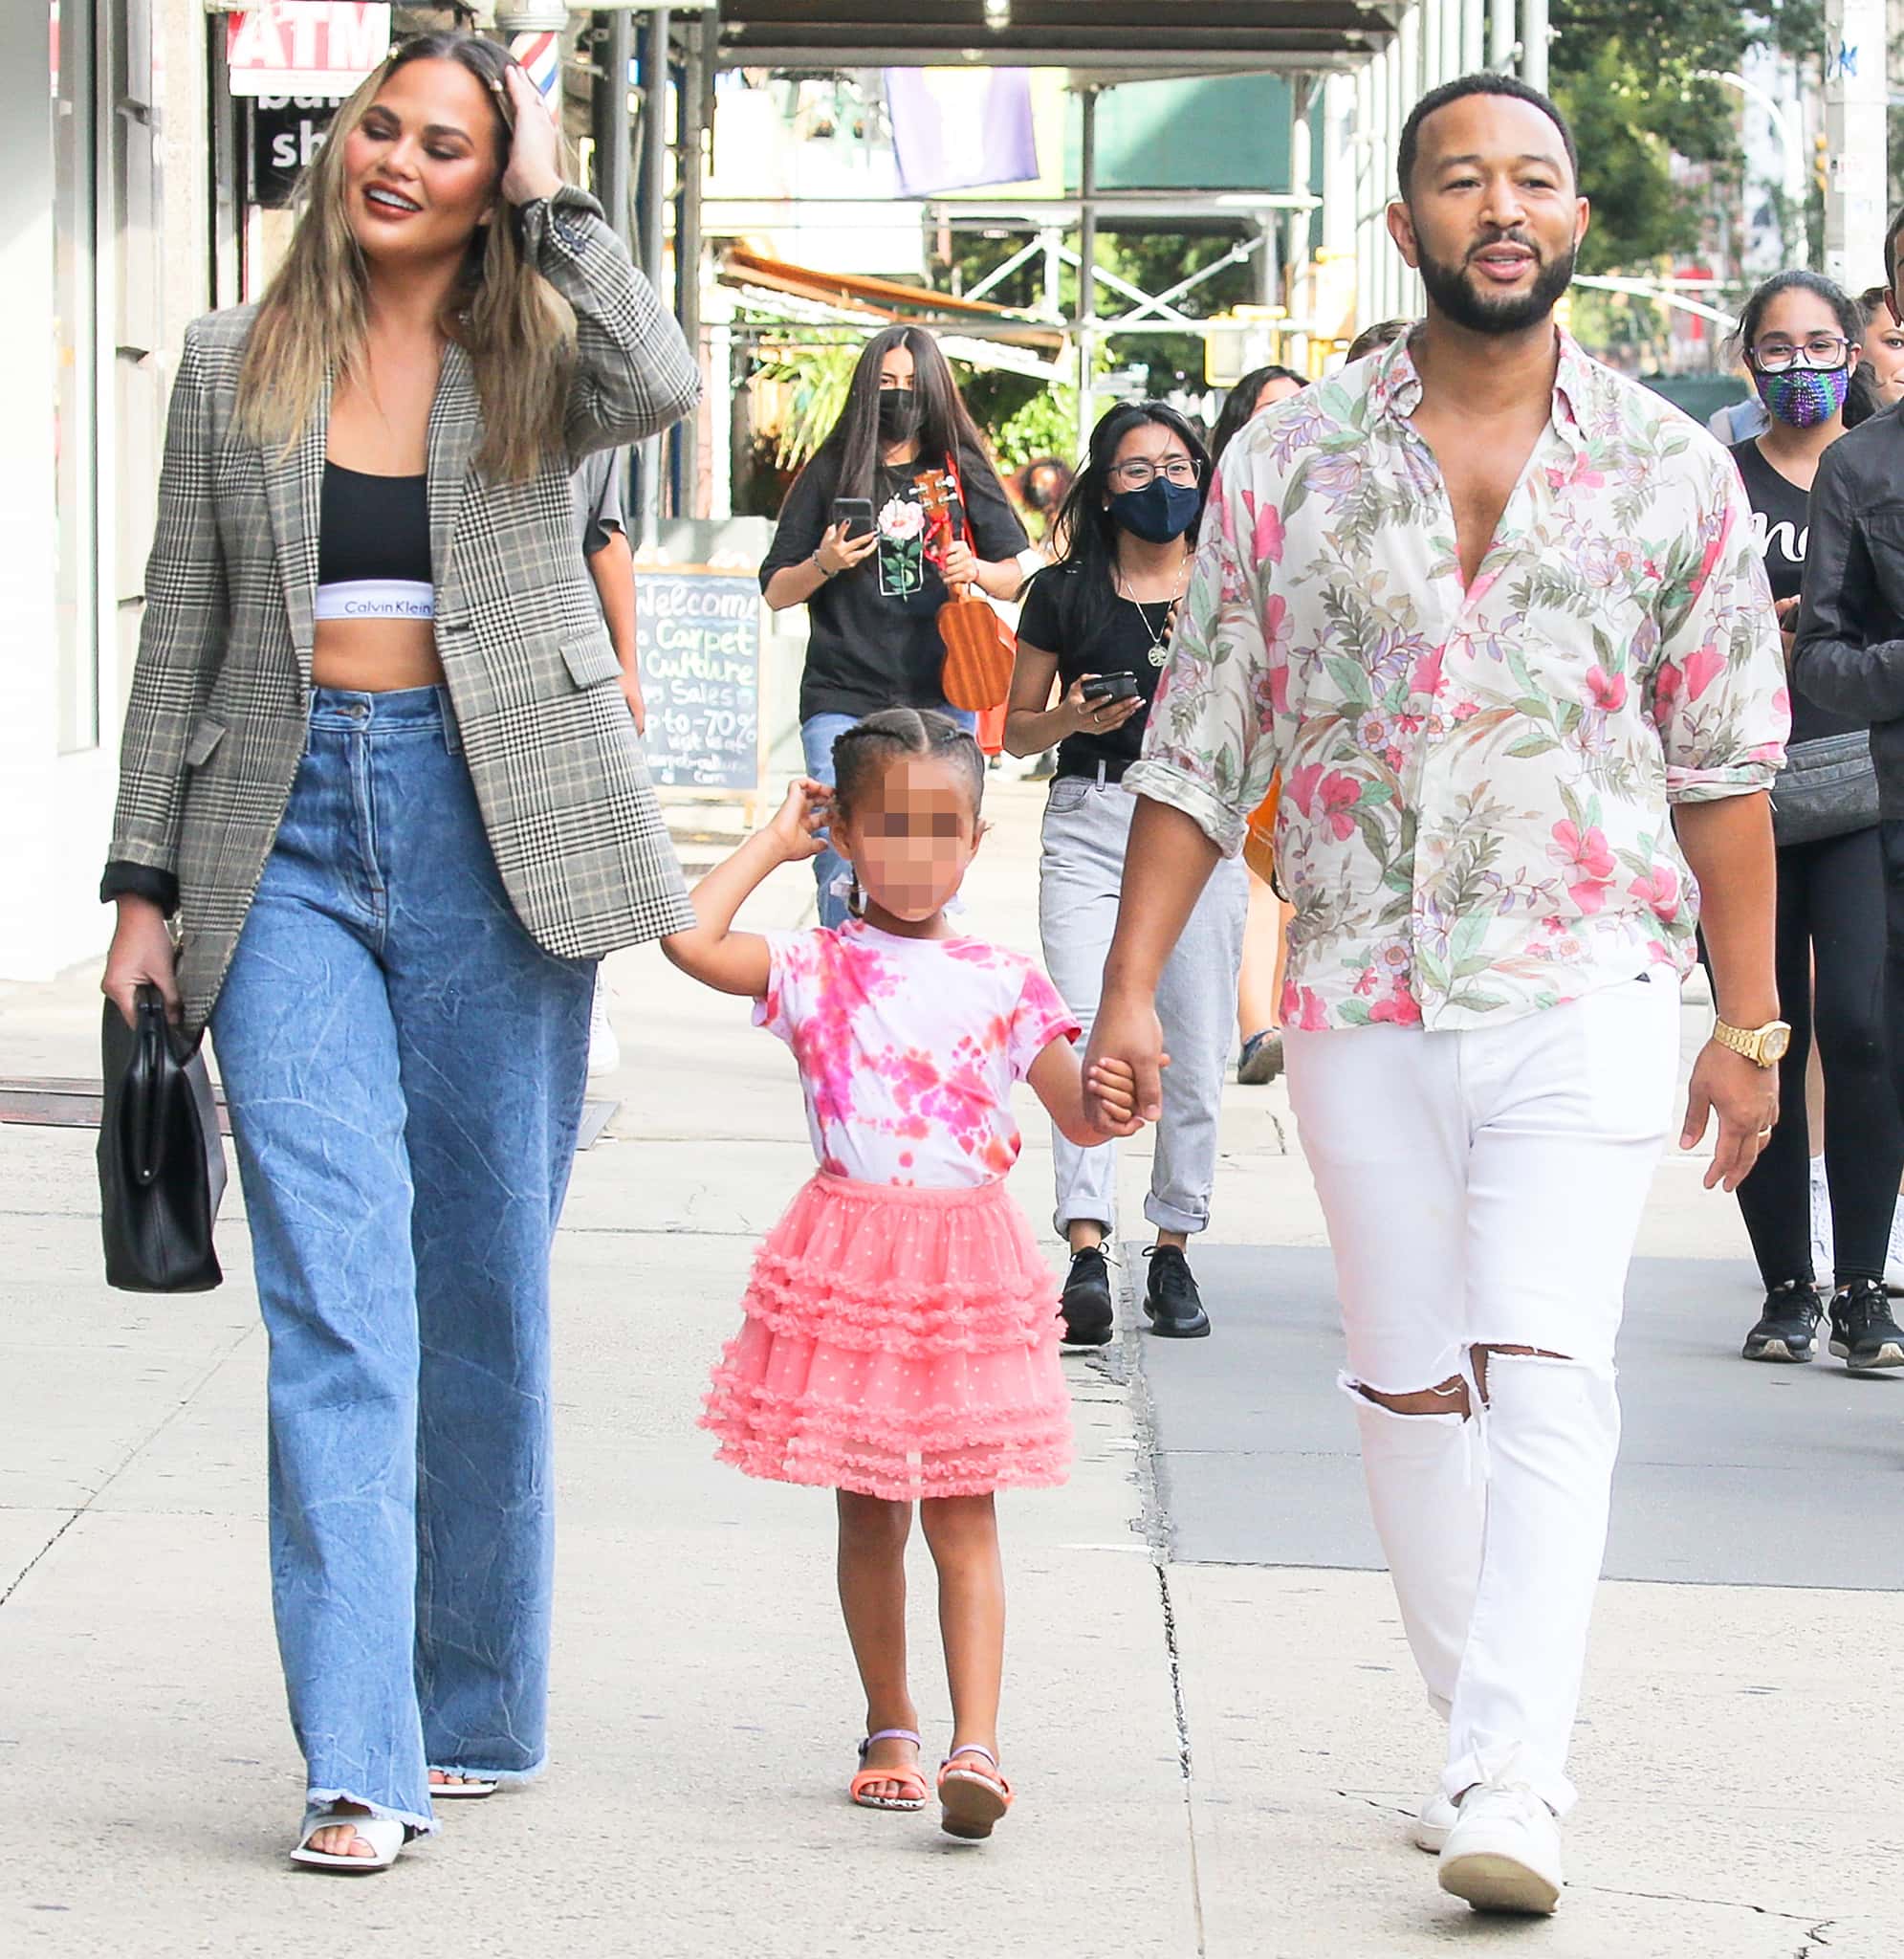 Chrissy Teigen and John Legend hold hands with daughter Luna while strolling in New York City on August 19, 2021